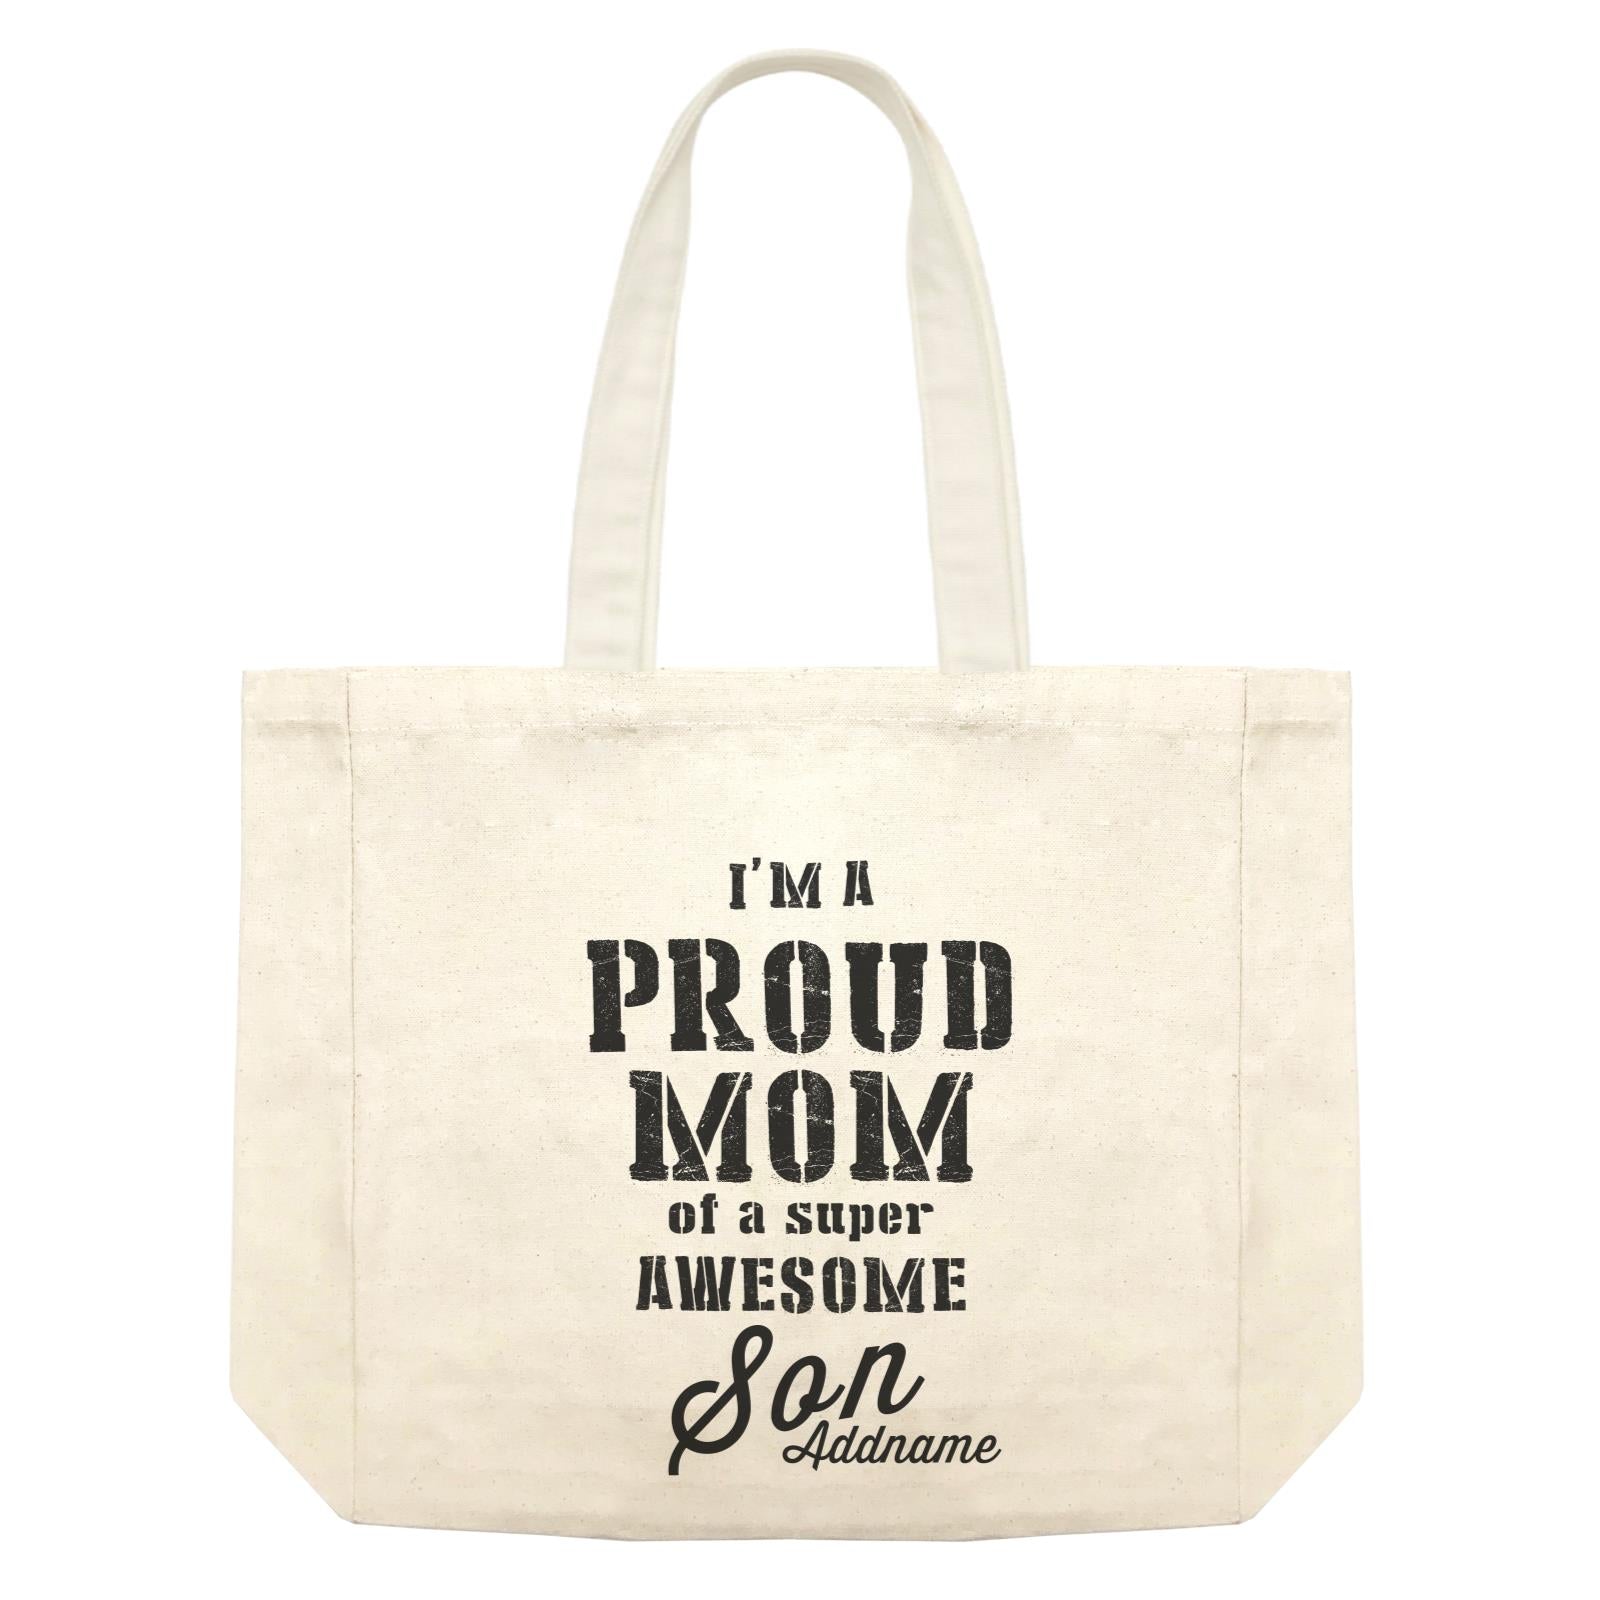 Proud Family Im A Proud Mom Of A Super Awesome Son Addname Shopping Bag